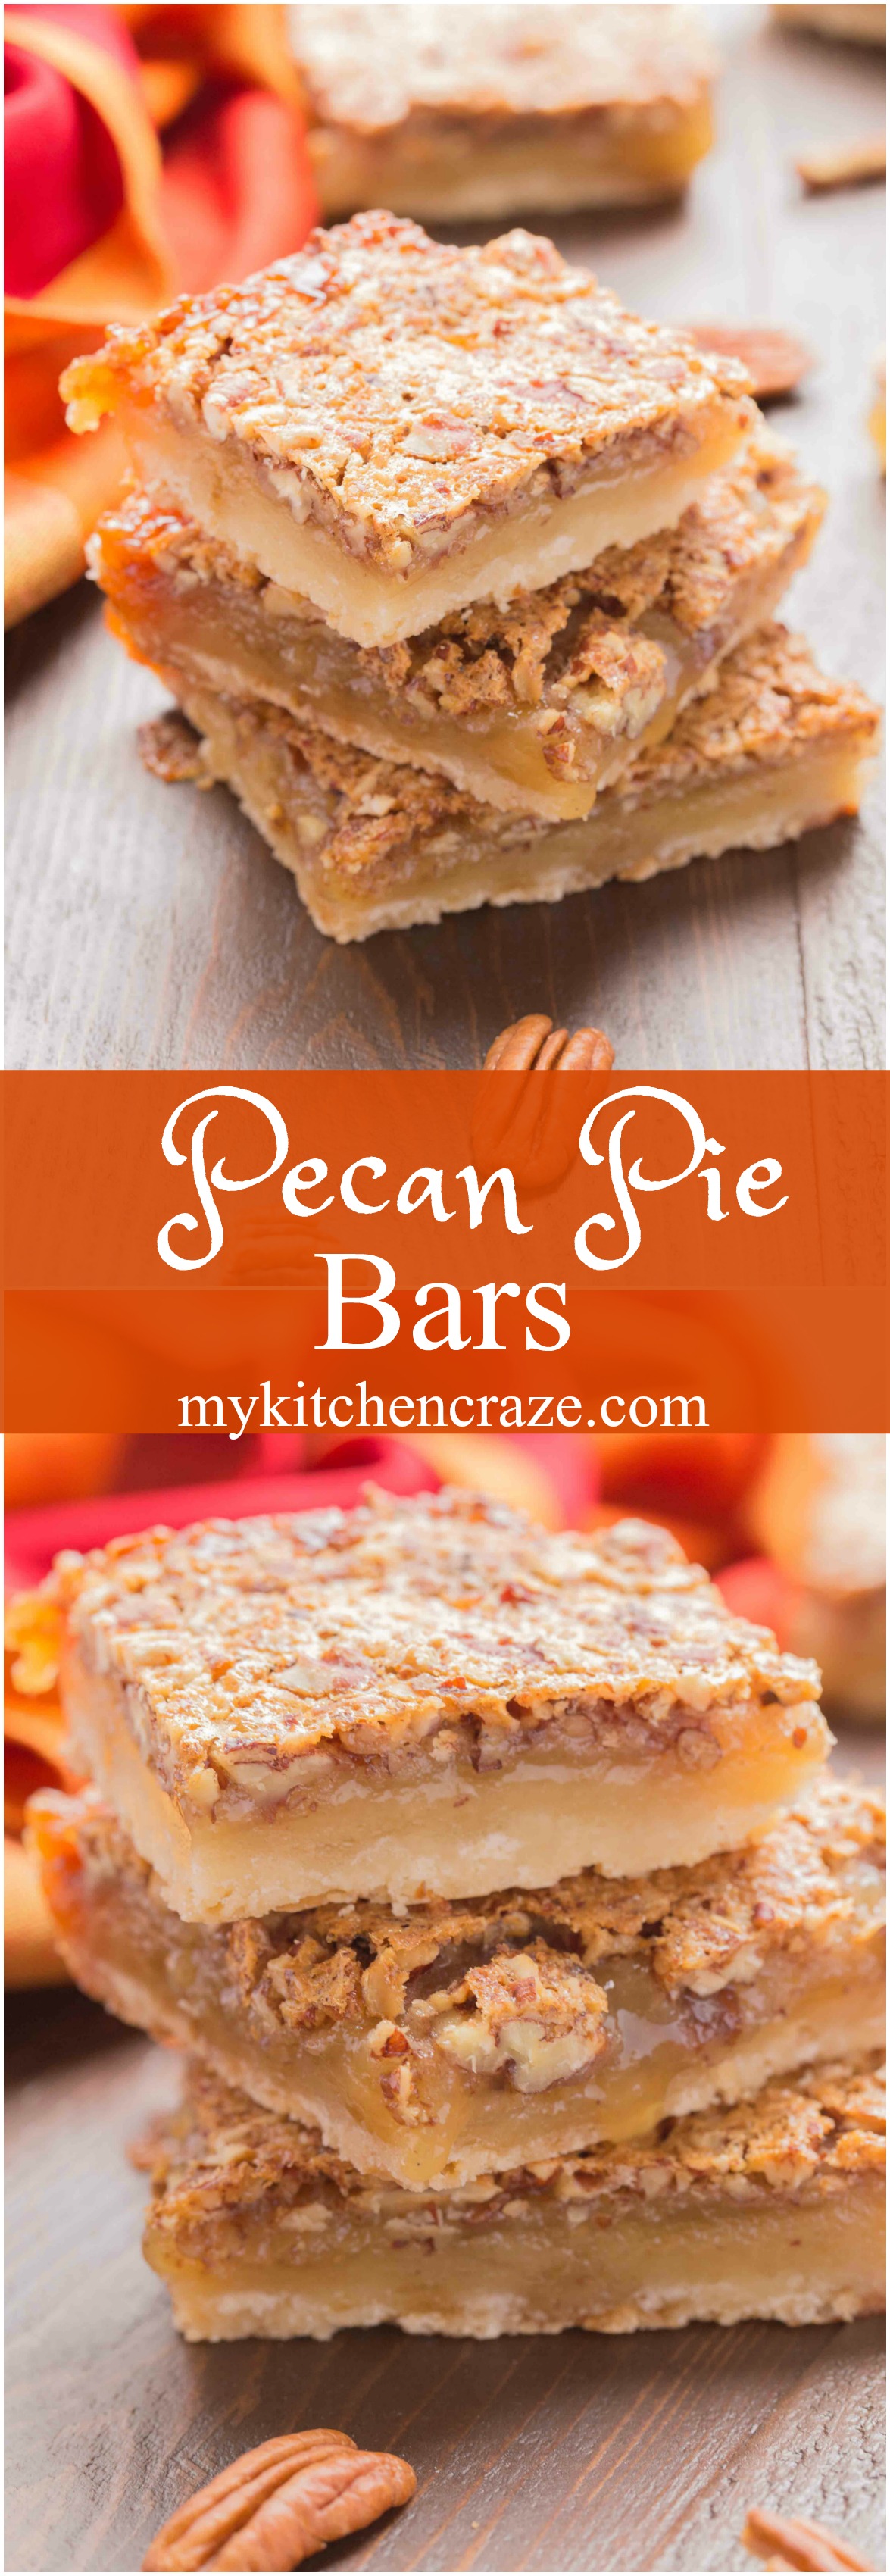 These Pecan Pie Bars are easier to make and serve rather than traditional pecan pie. Perfect for holidays or an any time treat!